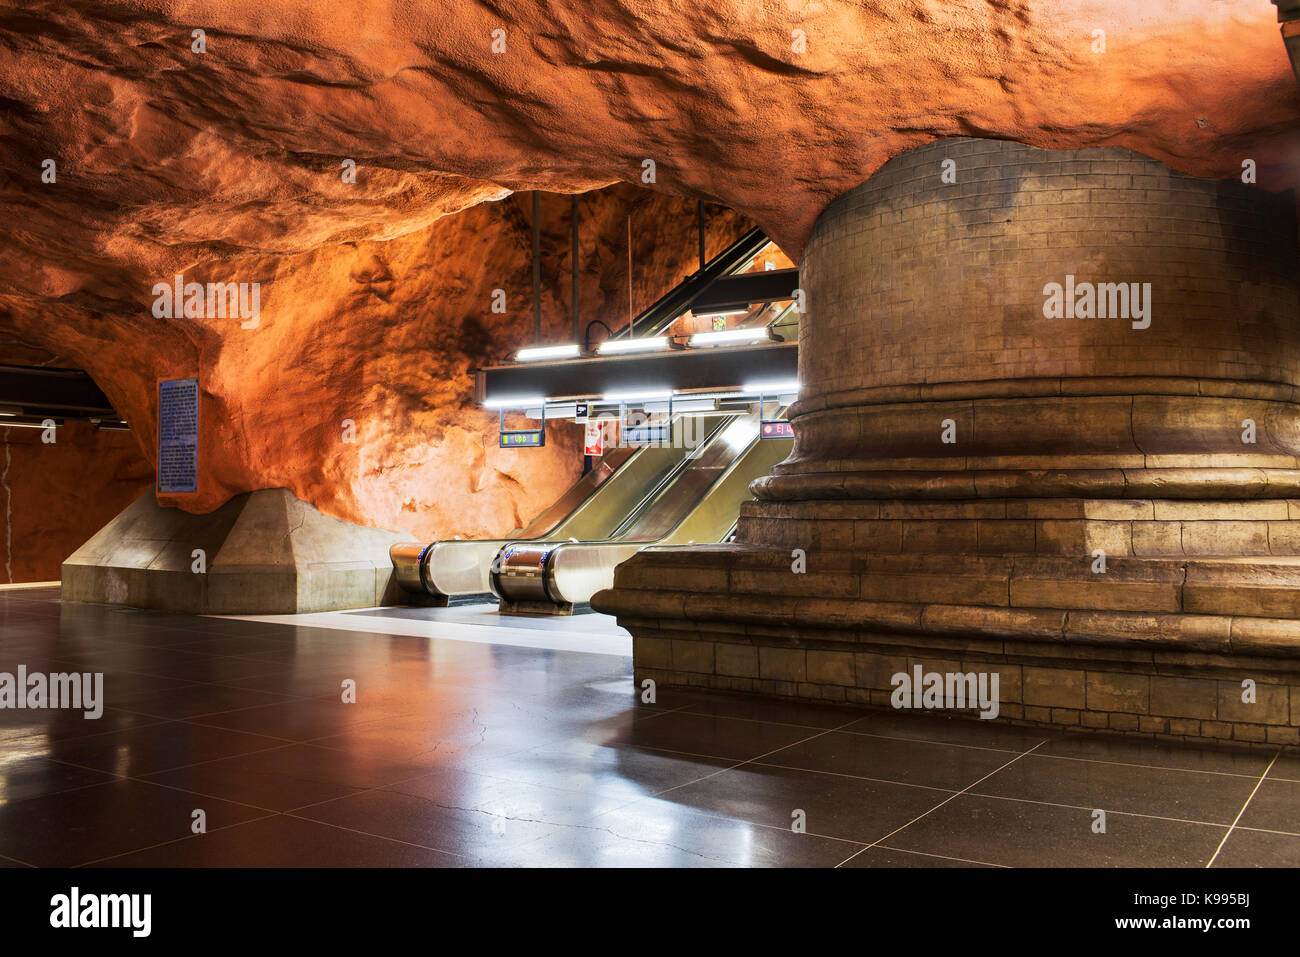 Radhuset station on the Stockholm Metro, or T-Bana, in Sweden. The Stockholm Metro is considered to be the longest art museum in the world. Stock Photo